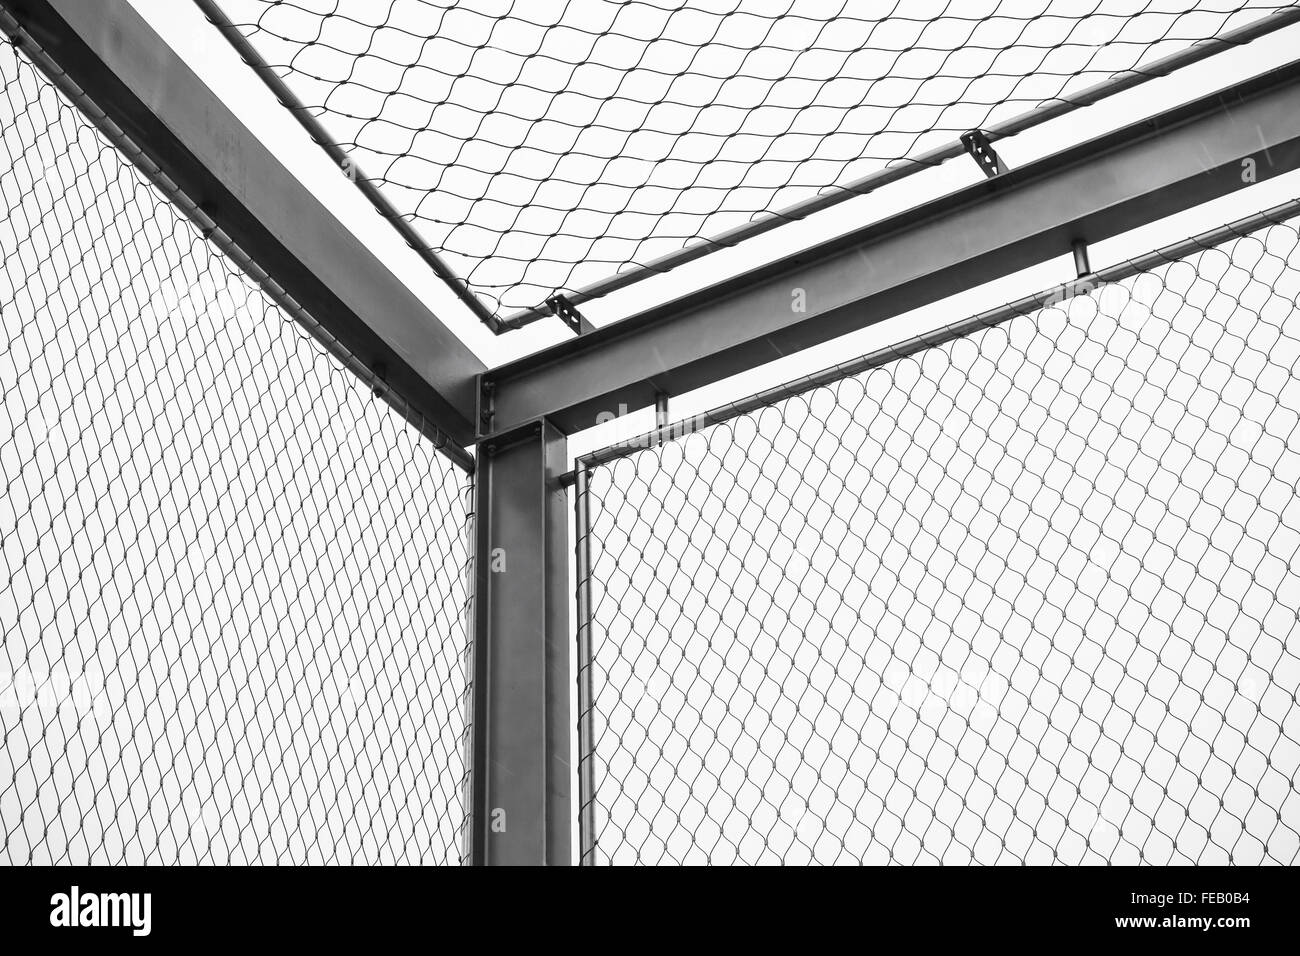 Corner of steel chain link fences, restricted area border Stock Photo